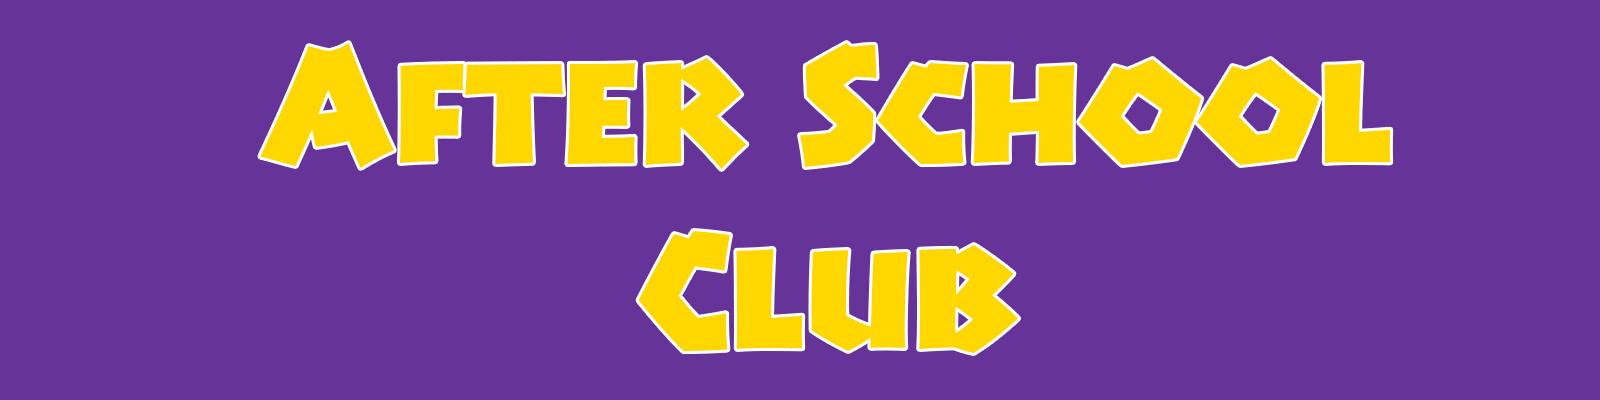 After School Clubs Banner